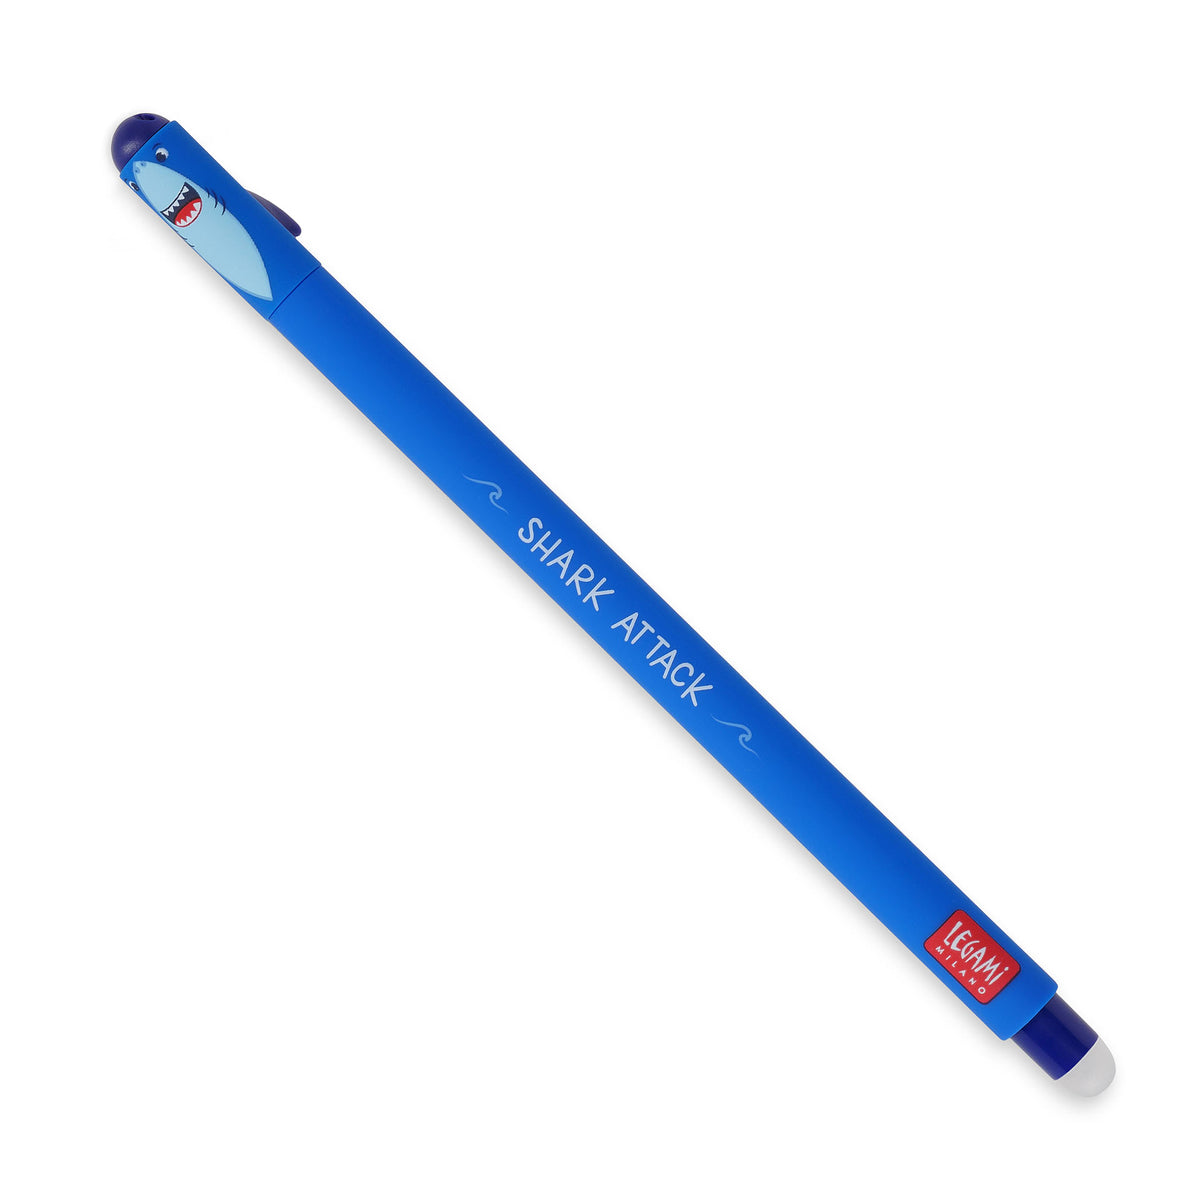 An image of a navy blue coloured erasable pen by Legami. The cap of the pen is like the head of a shark with fin formed on the side. It has an erasble ball at the other end of the pen.